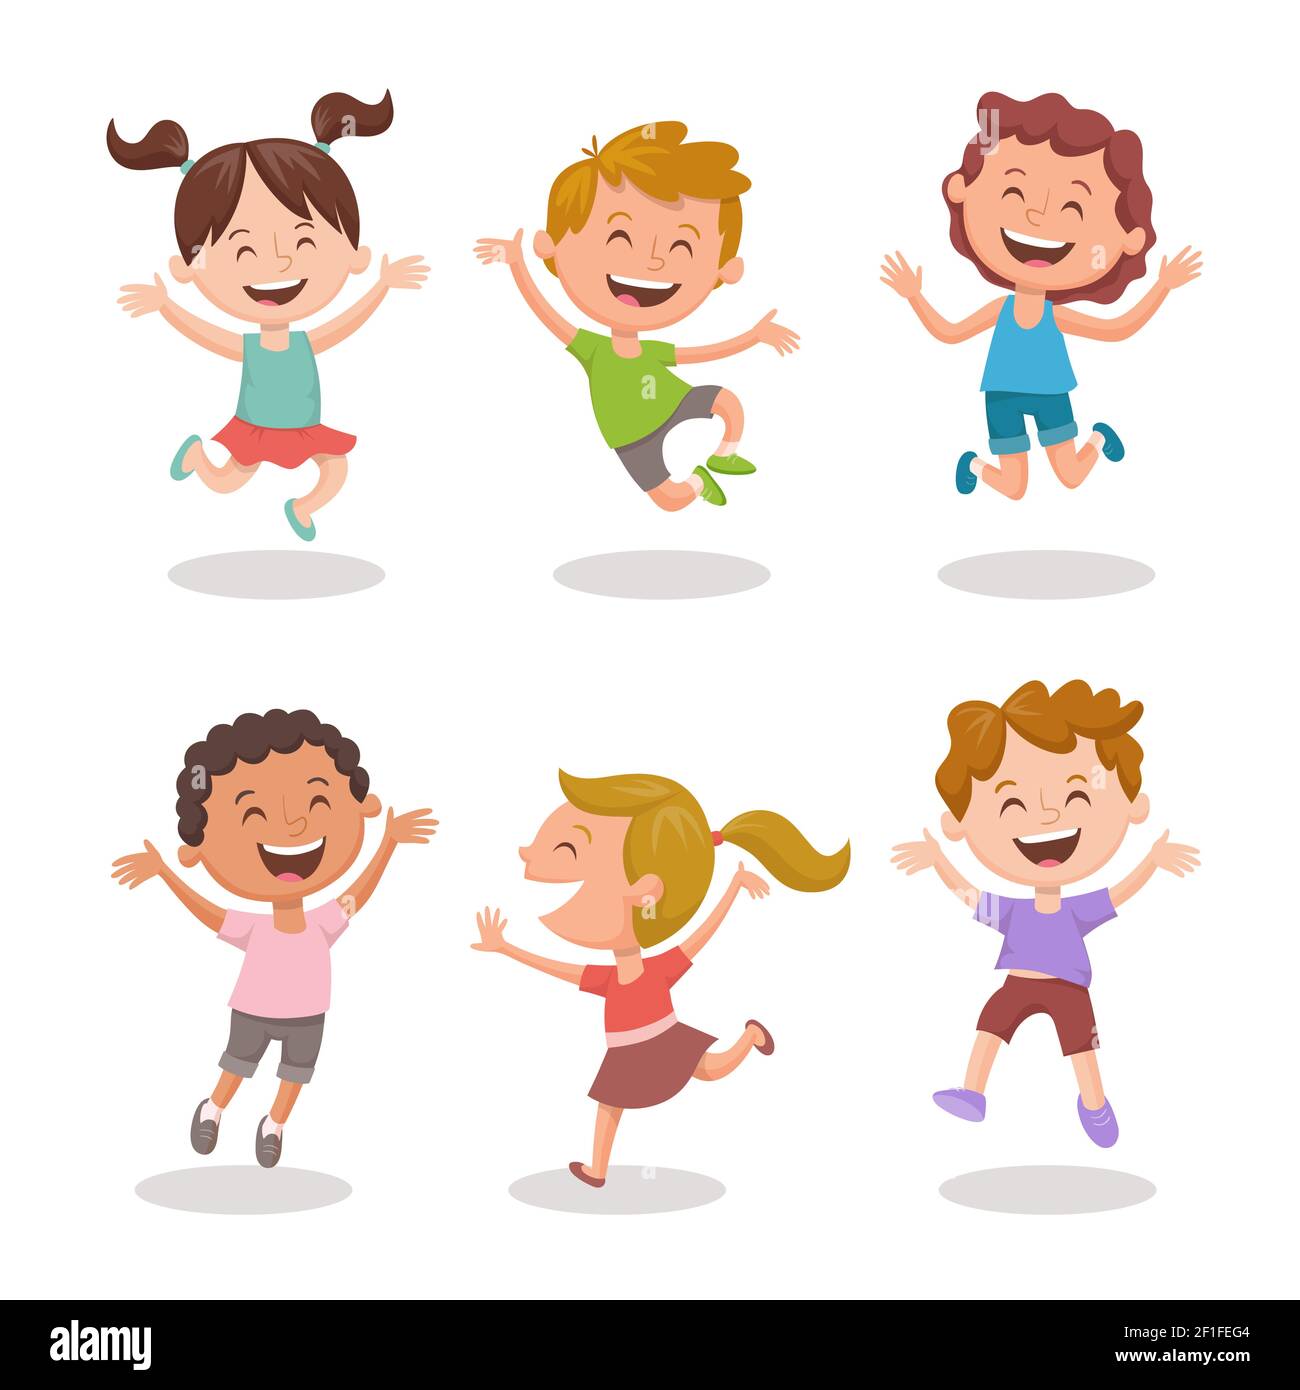 Happy multiracial kids joyfully jumping and laughing. Cartoon character design, isolated on white background. Set 3 of 3. Stock Vector